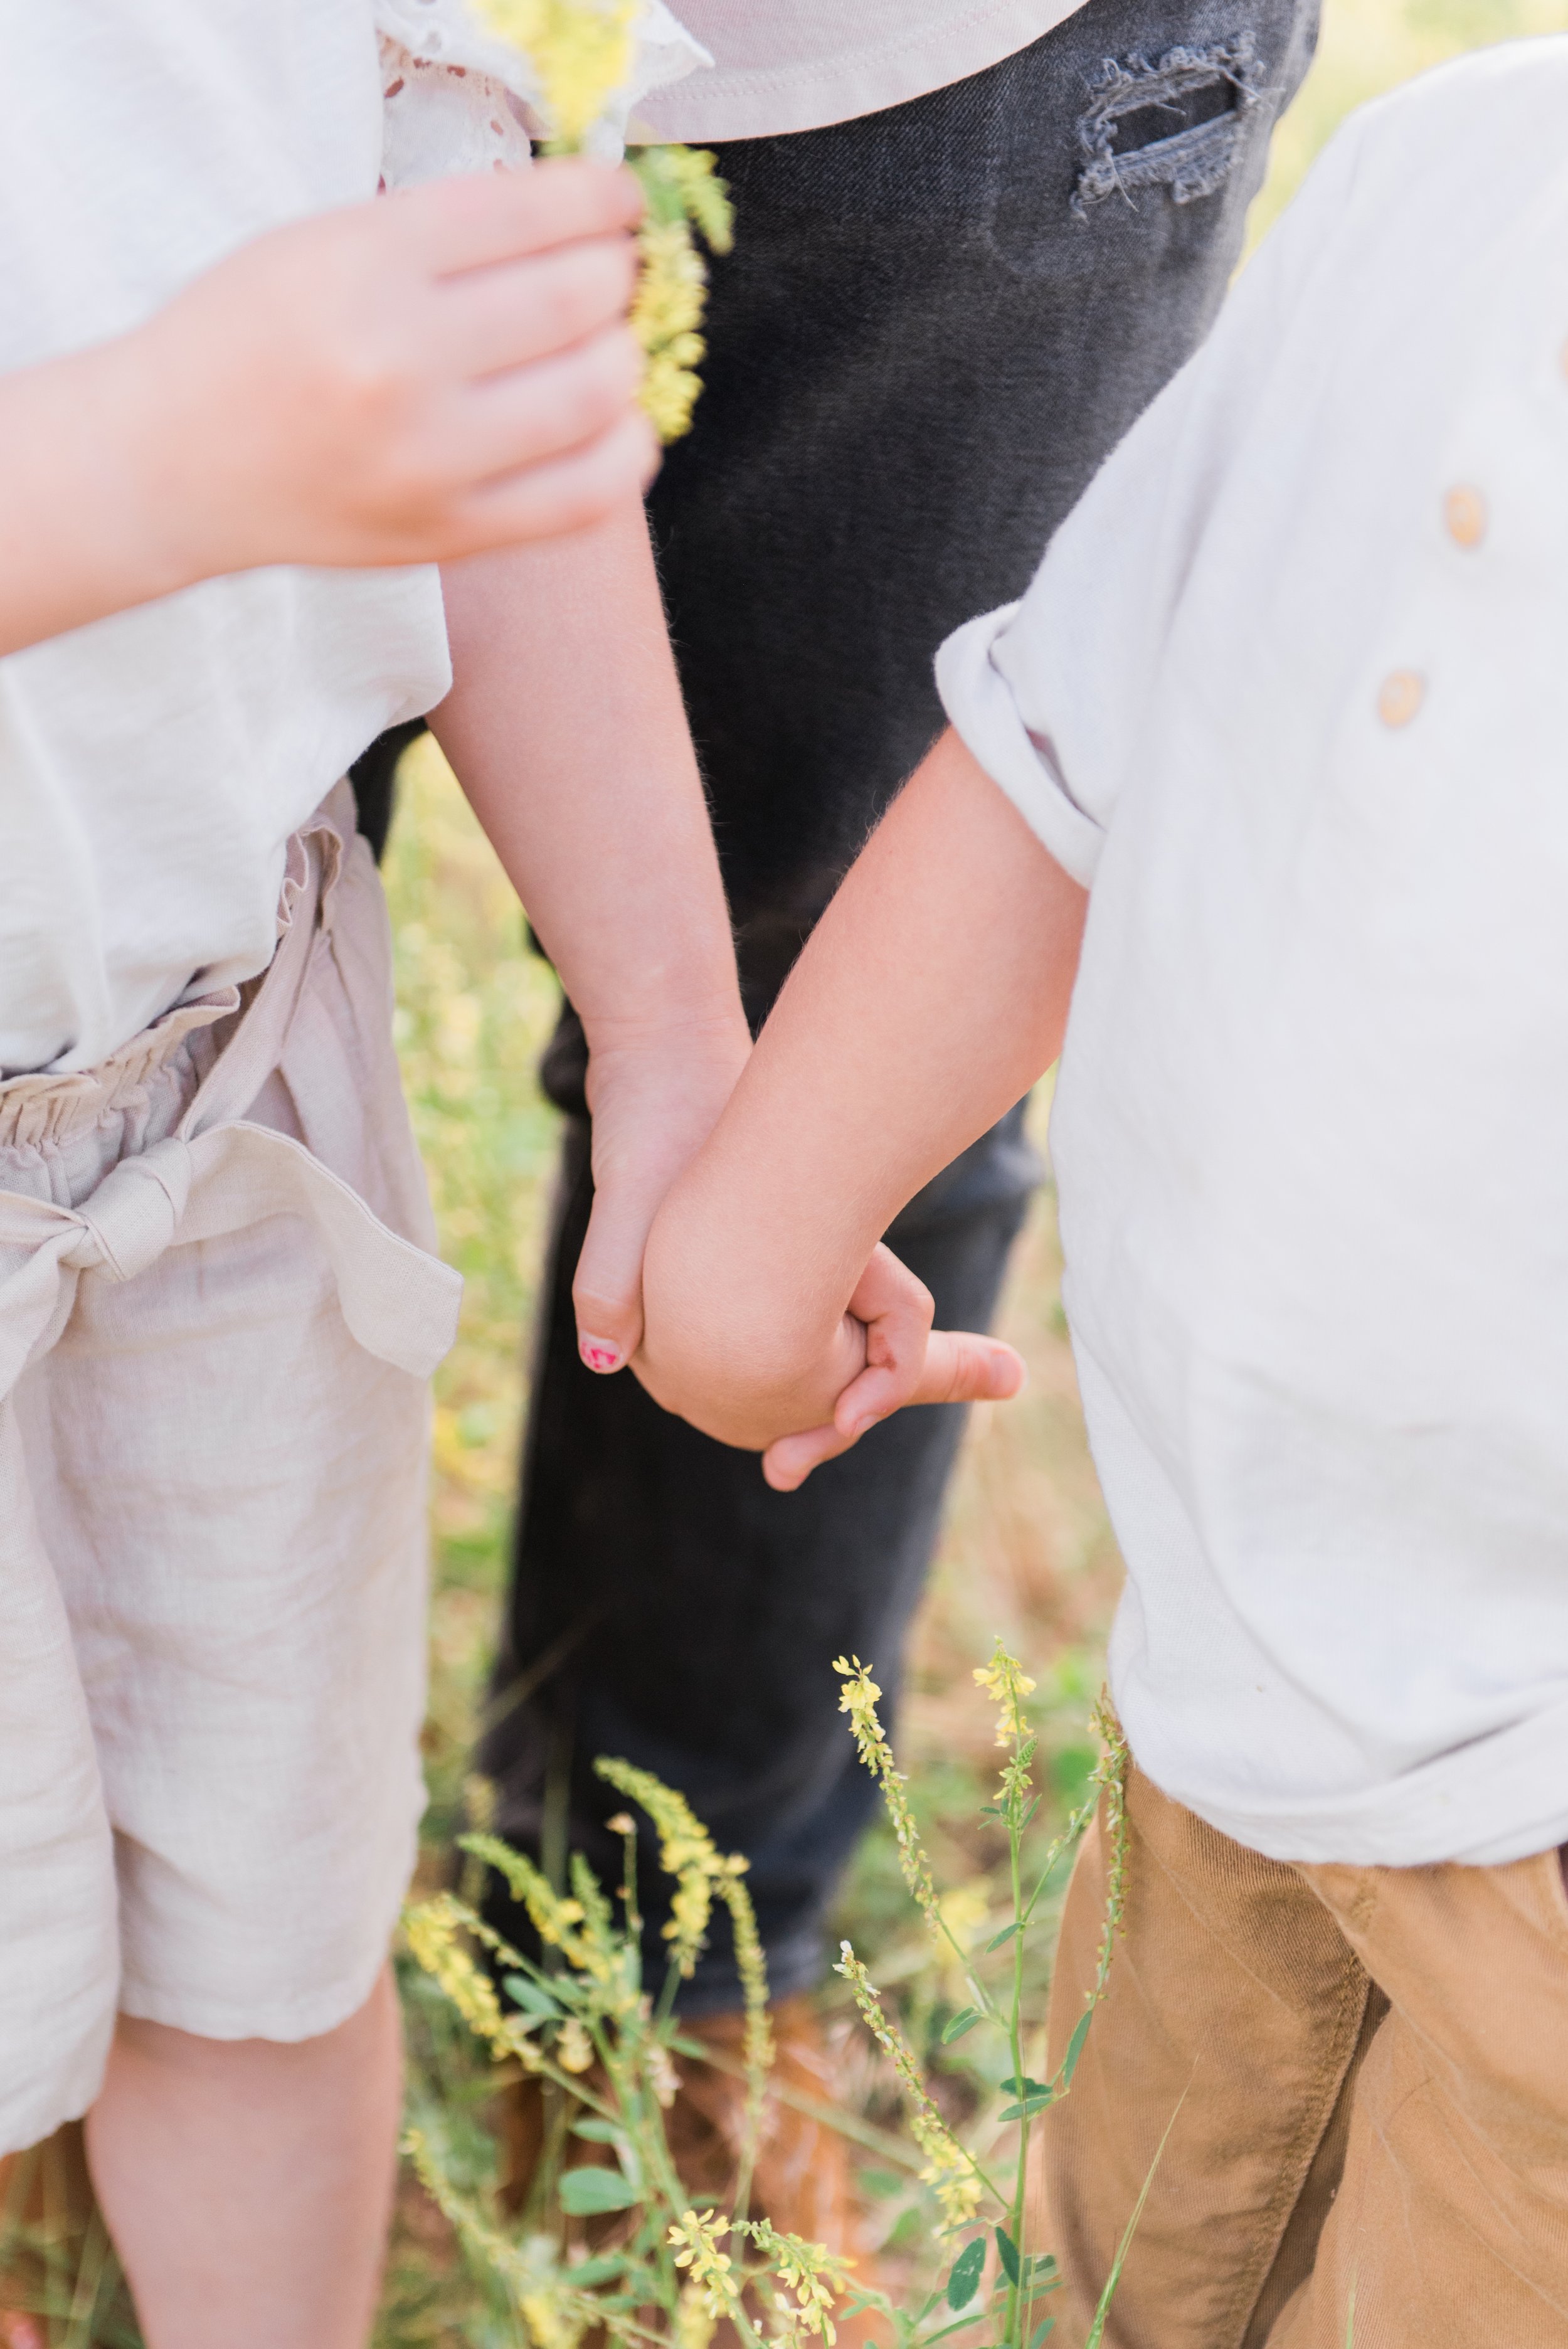  Two siblings hold hands in a family photoshoot captured by Jacquie Erickson. Sandy Springs Georgia email templates know your clients photo timeline updates#postphotoshoottips #GeorgiaFamilyPhotographer #photographertips #peachtreeGAphotographer 